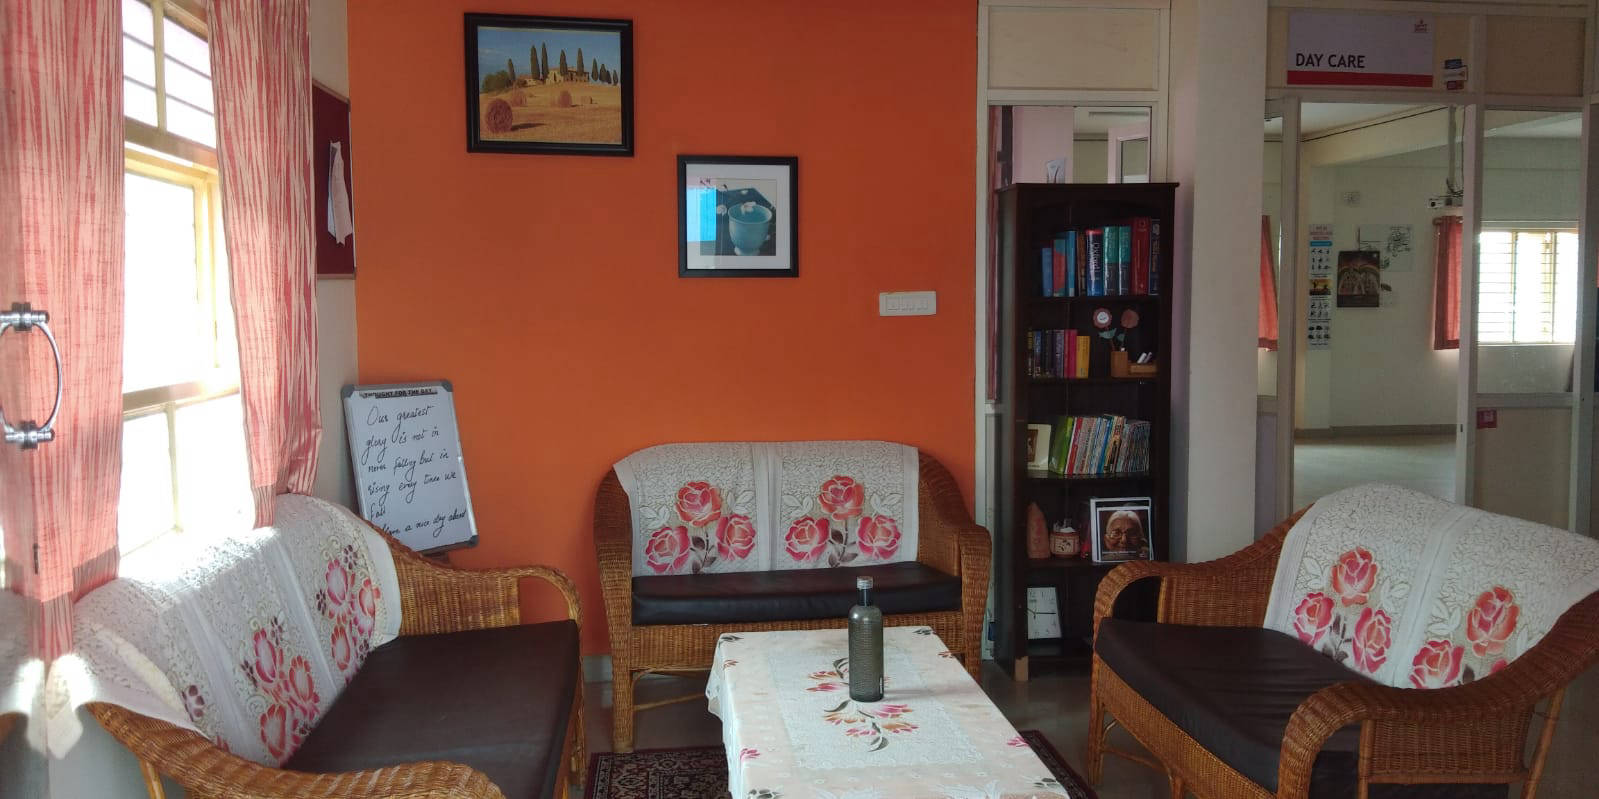 Another view of the homely waiting area at NMT's Jayanagar Day Care Centre